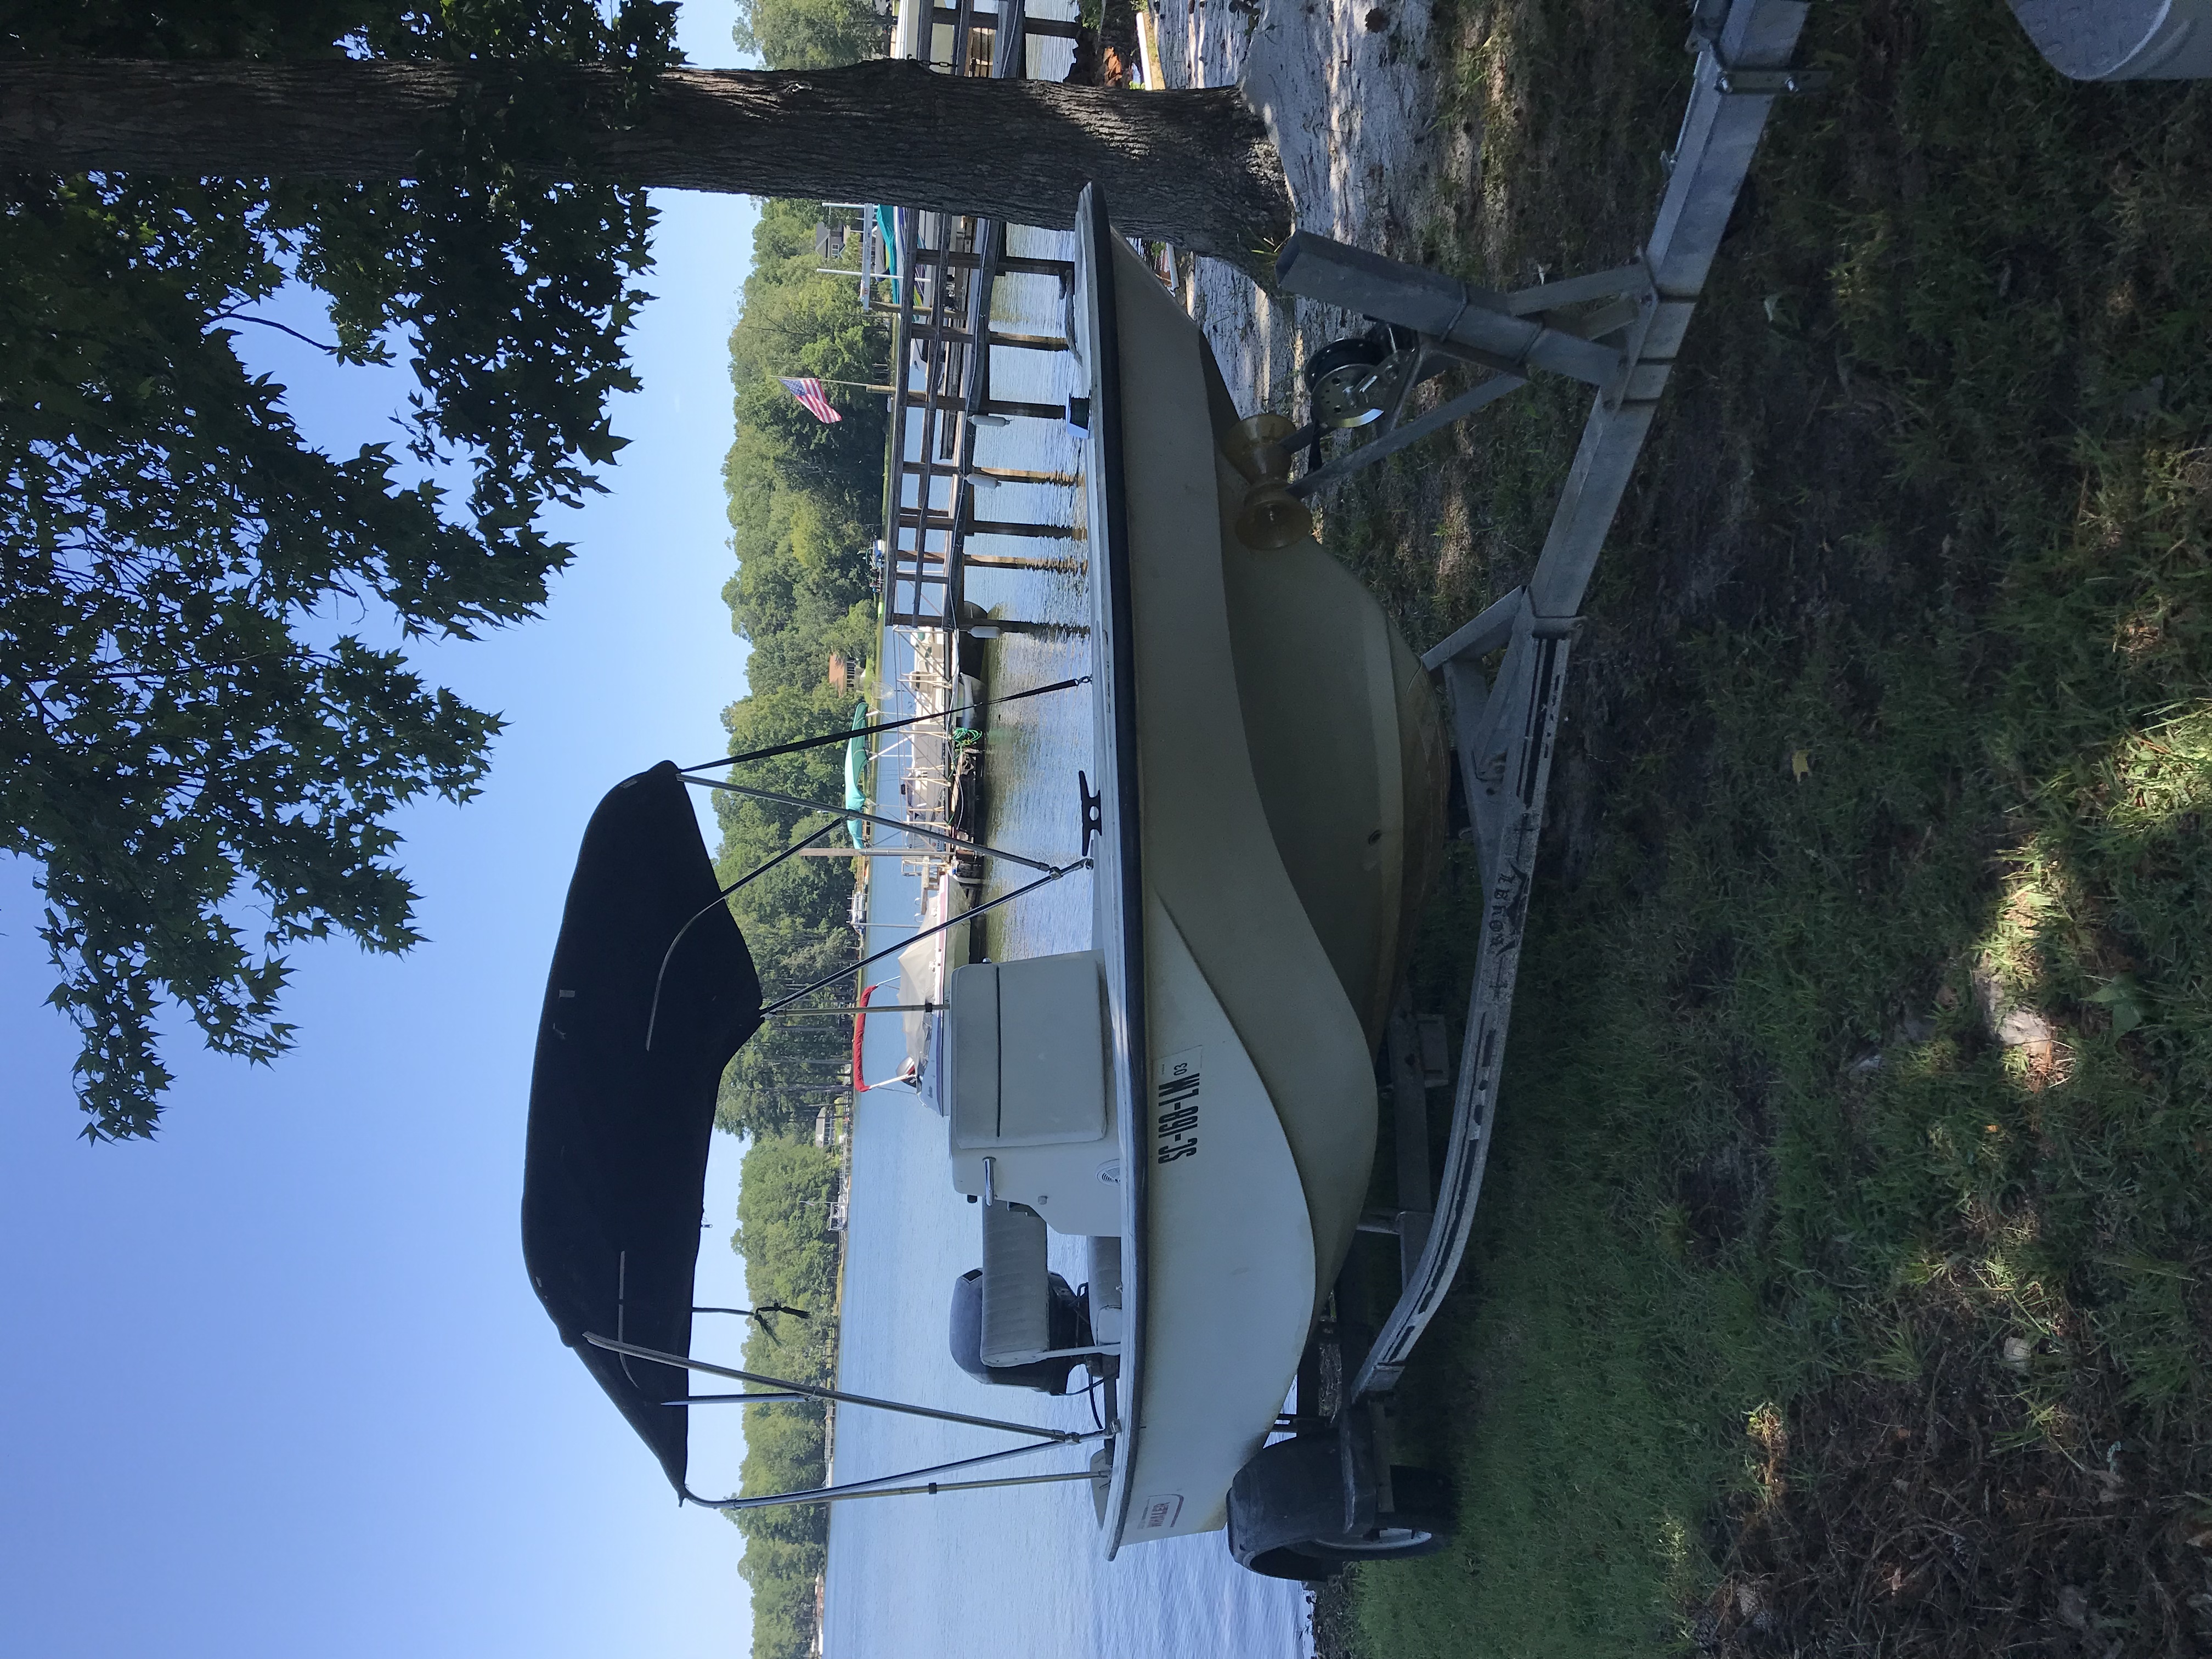 1977 17 foot Boston Whaler Newport Power boat for sale in Chapin, SC - image 2 